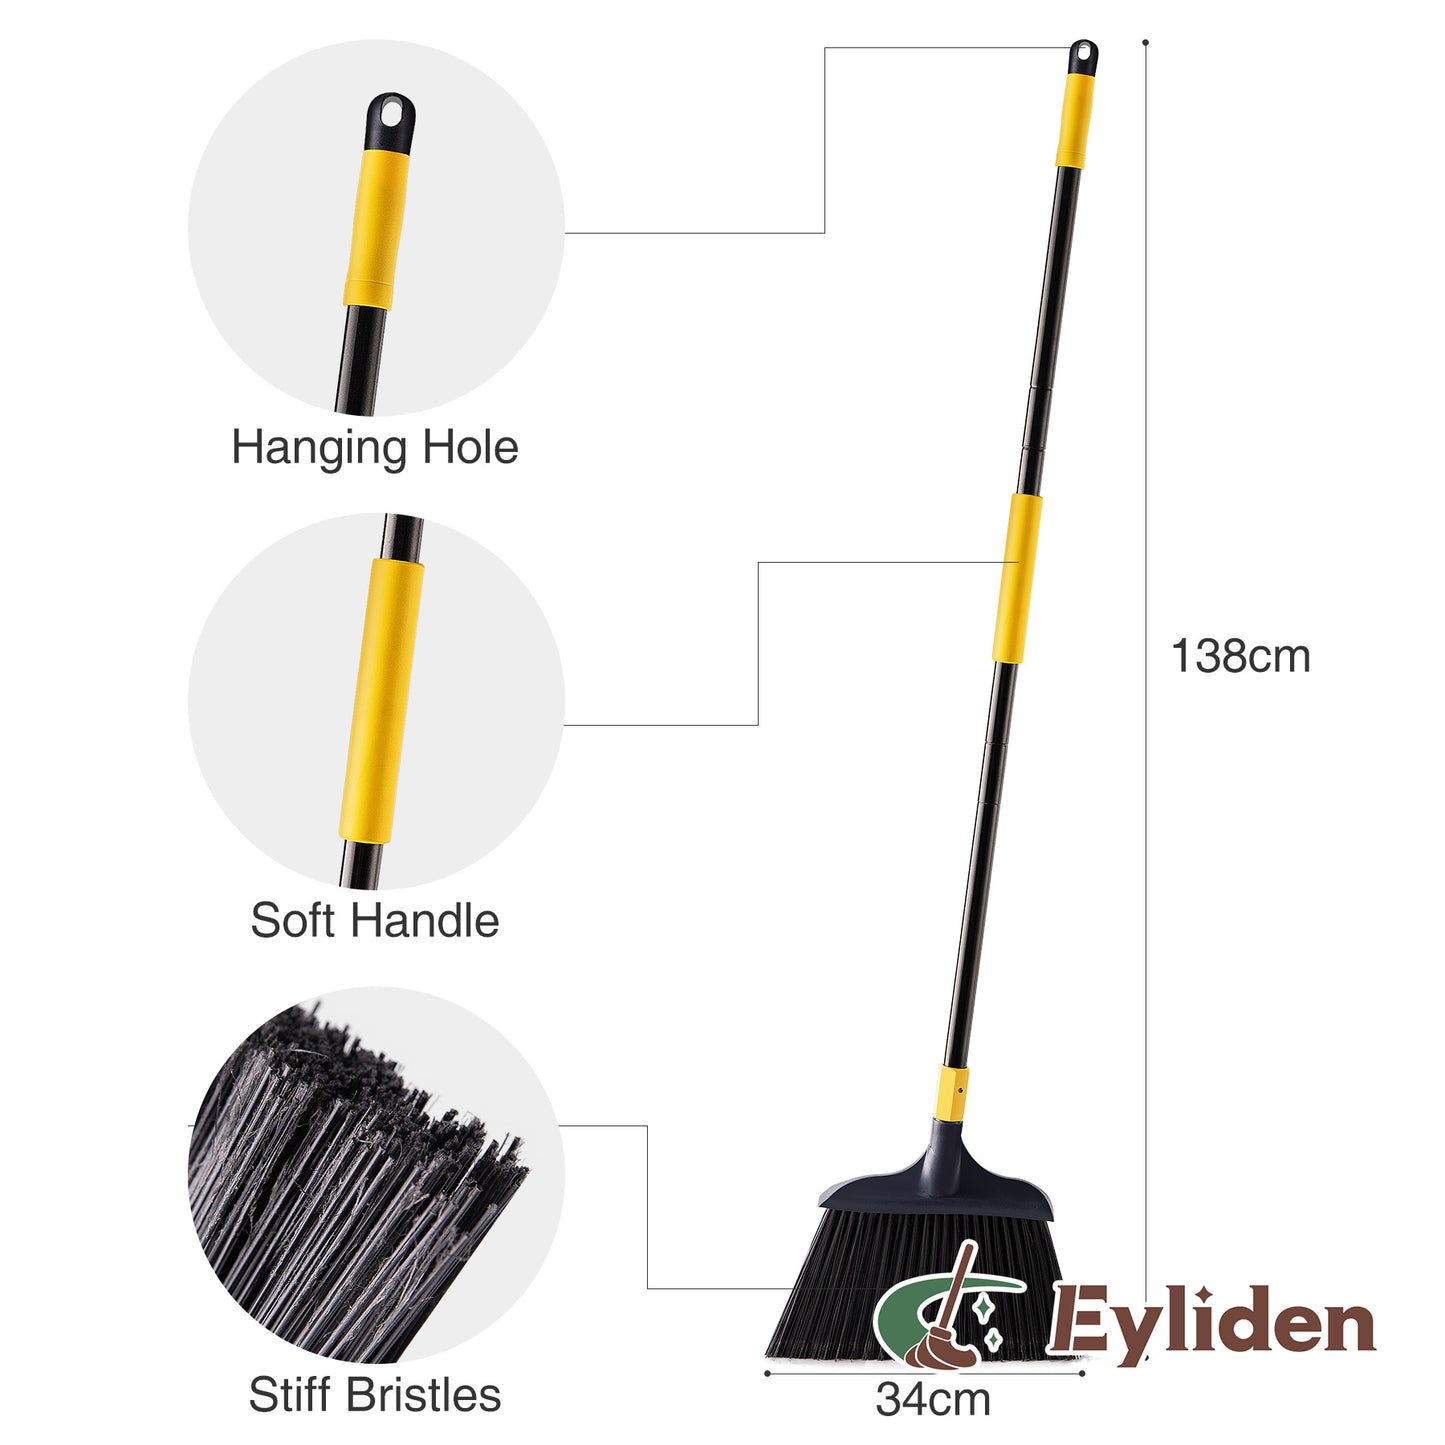 Eyliden Heavy-Duty Broom Outdoor Commercial Perfect for Courtyard Garage Lobby Mall Market Floor Home Kitchen Room Office Pet Hair Rubbish 54in